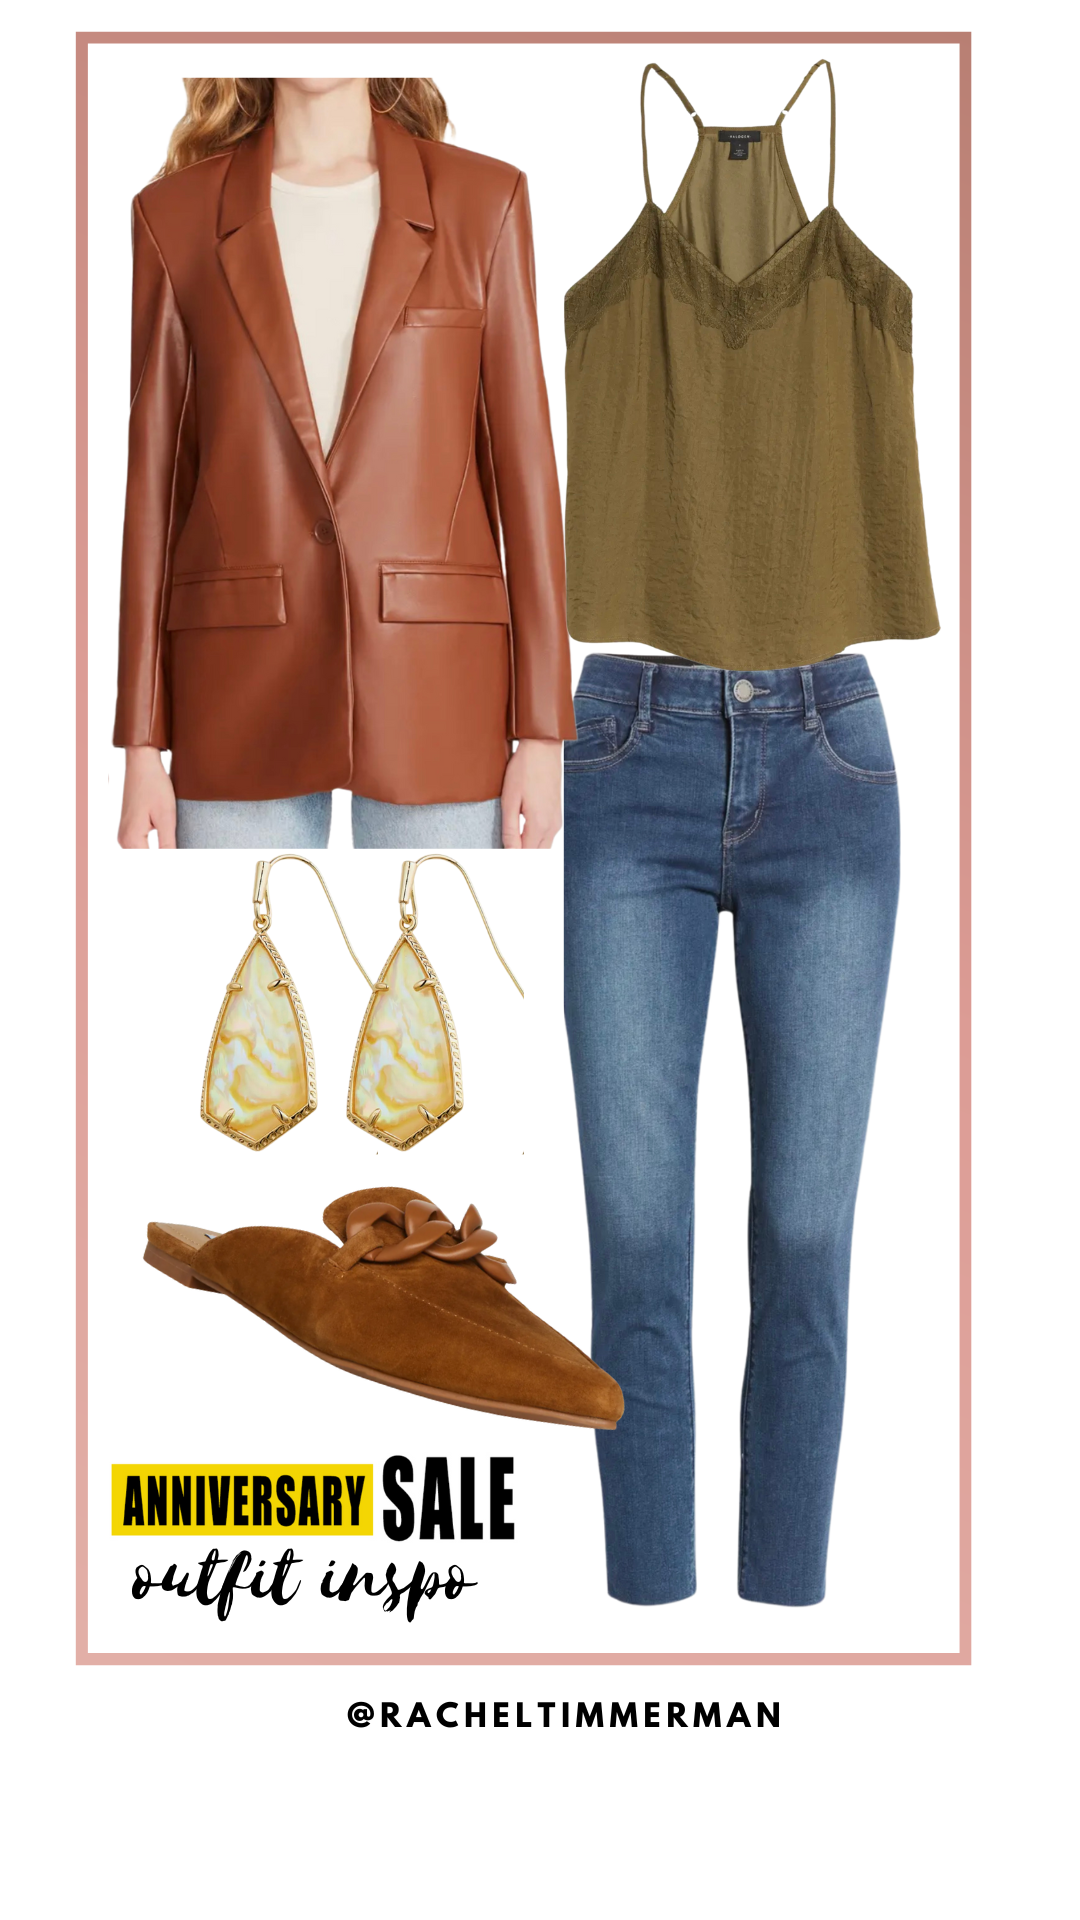 Nordstrom Anniversary Sale 2022: 10 Completely Styled Looks + More #NordstromAnniversarySale #NSale #PreFall2022